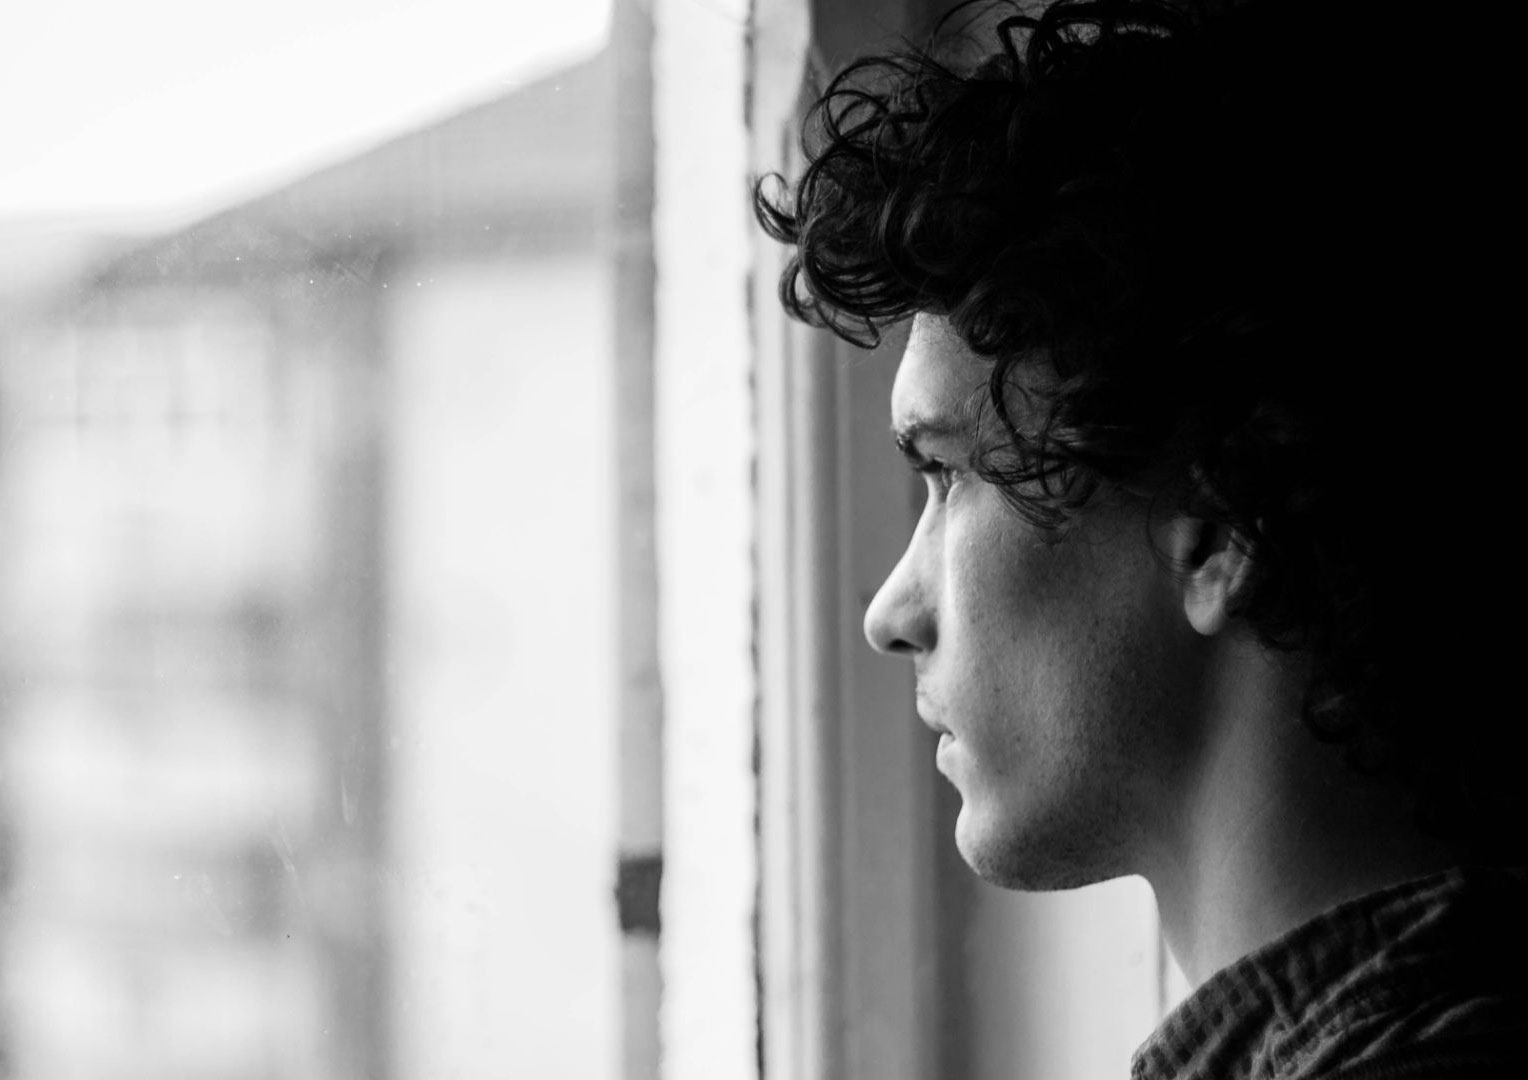 Where to find help if you’re experiencing suicidal thoughts